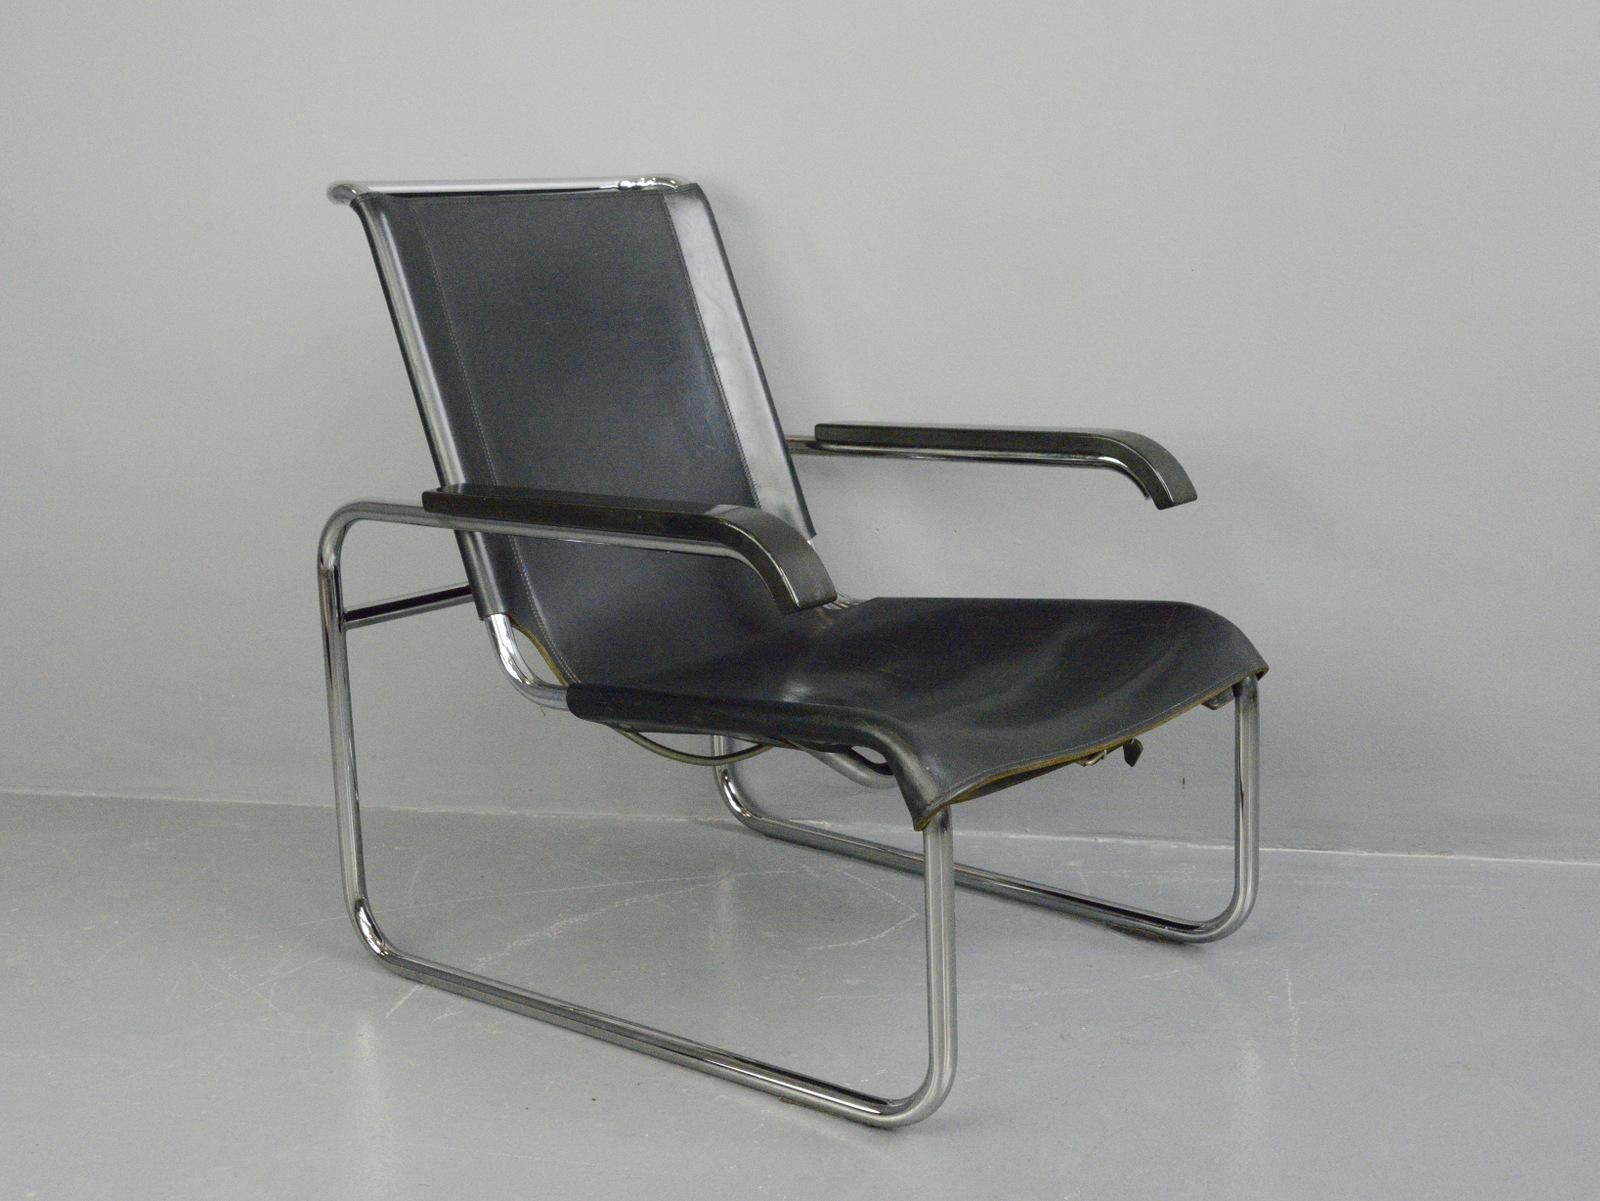 Bauhaus lounge chair by Marcel Breuer for Thonet

- Chromed tubular steel frame
- Sprung cantilever seat
- Buffalo leather seat
- Model B35
- First designed by Marcel Breuer in 1928
- Produced by Thonet
- German, 1970s
- Measures: 65cm wide